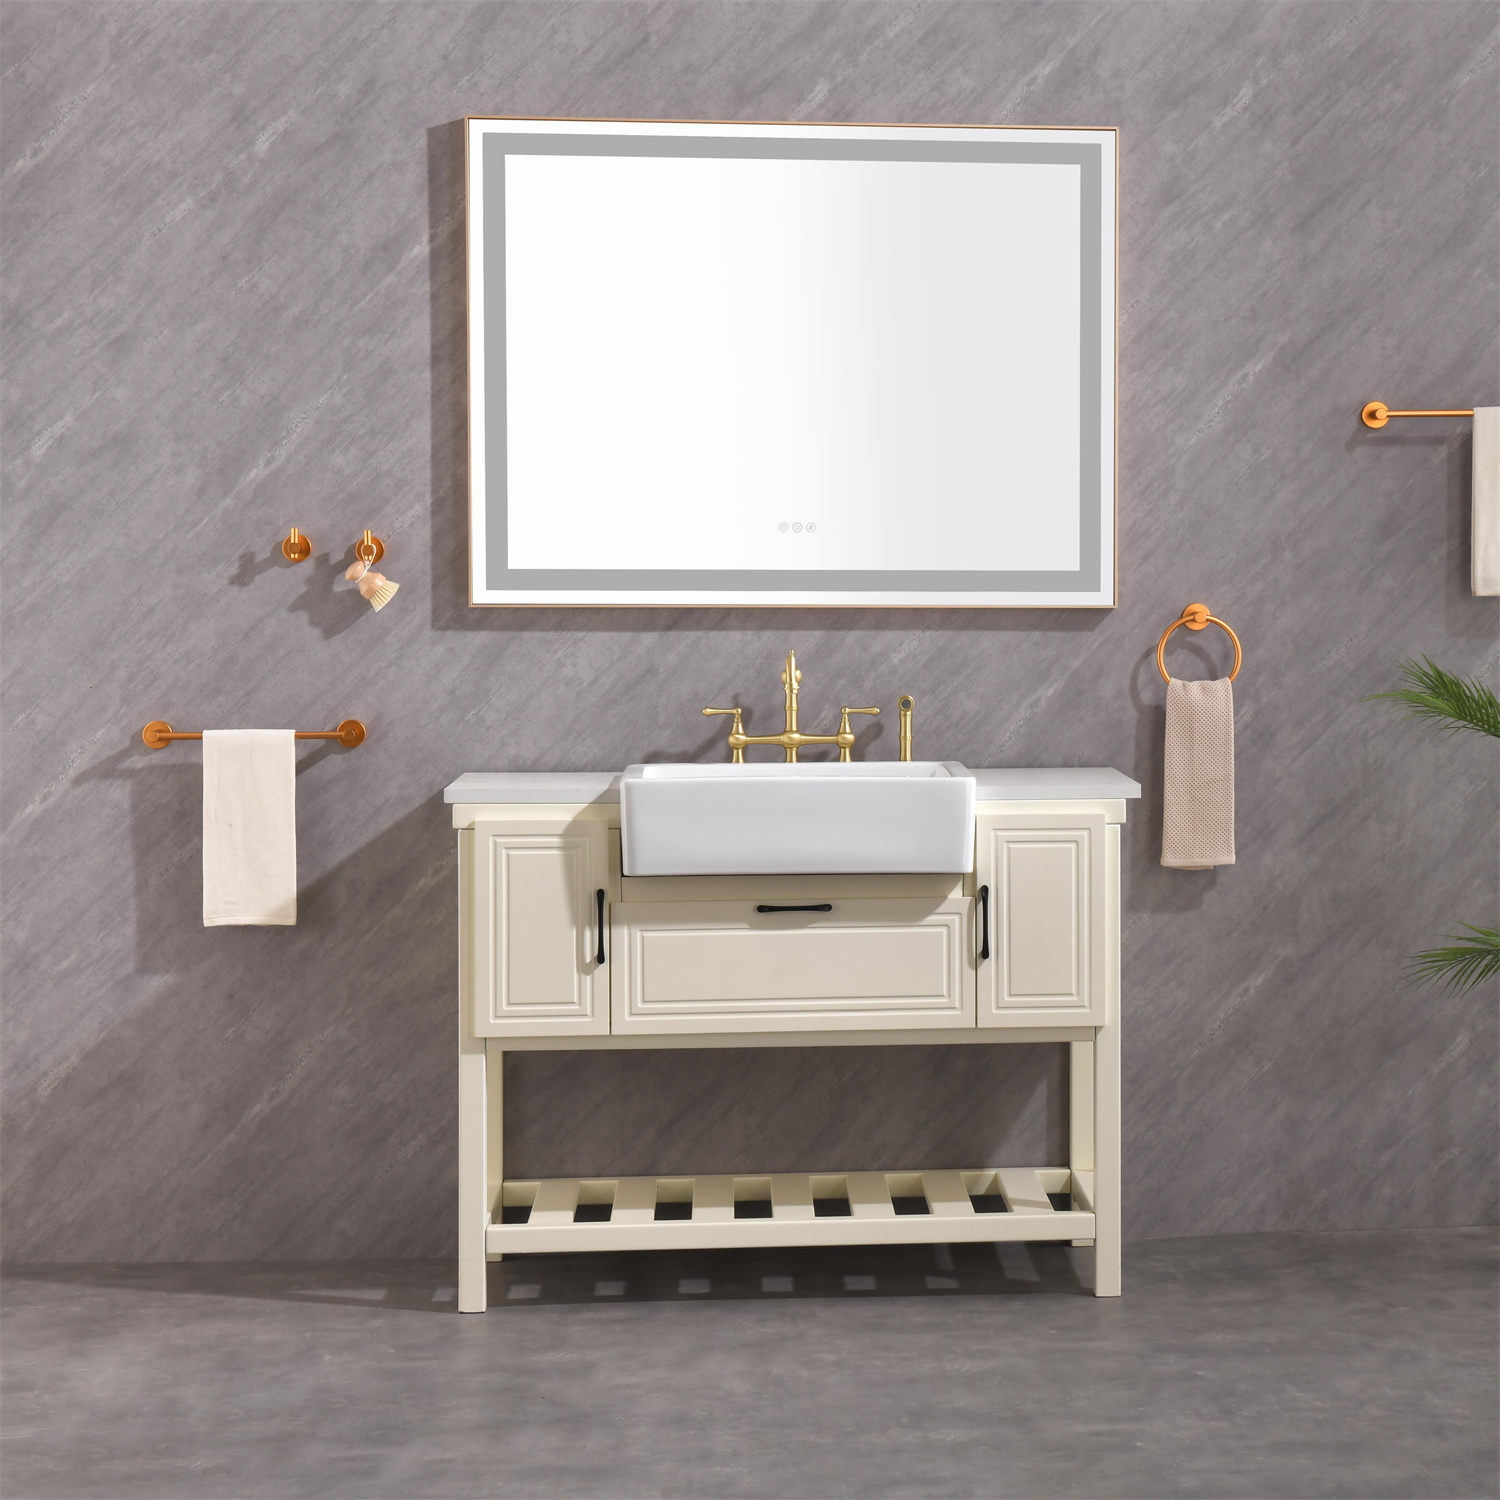 48x36 LED Lighted Bathroom Wall Mounted Mirror with High Lumen+Anti-Fog Separately Control